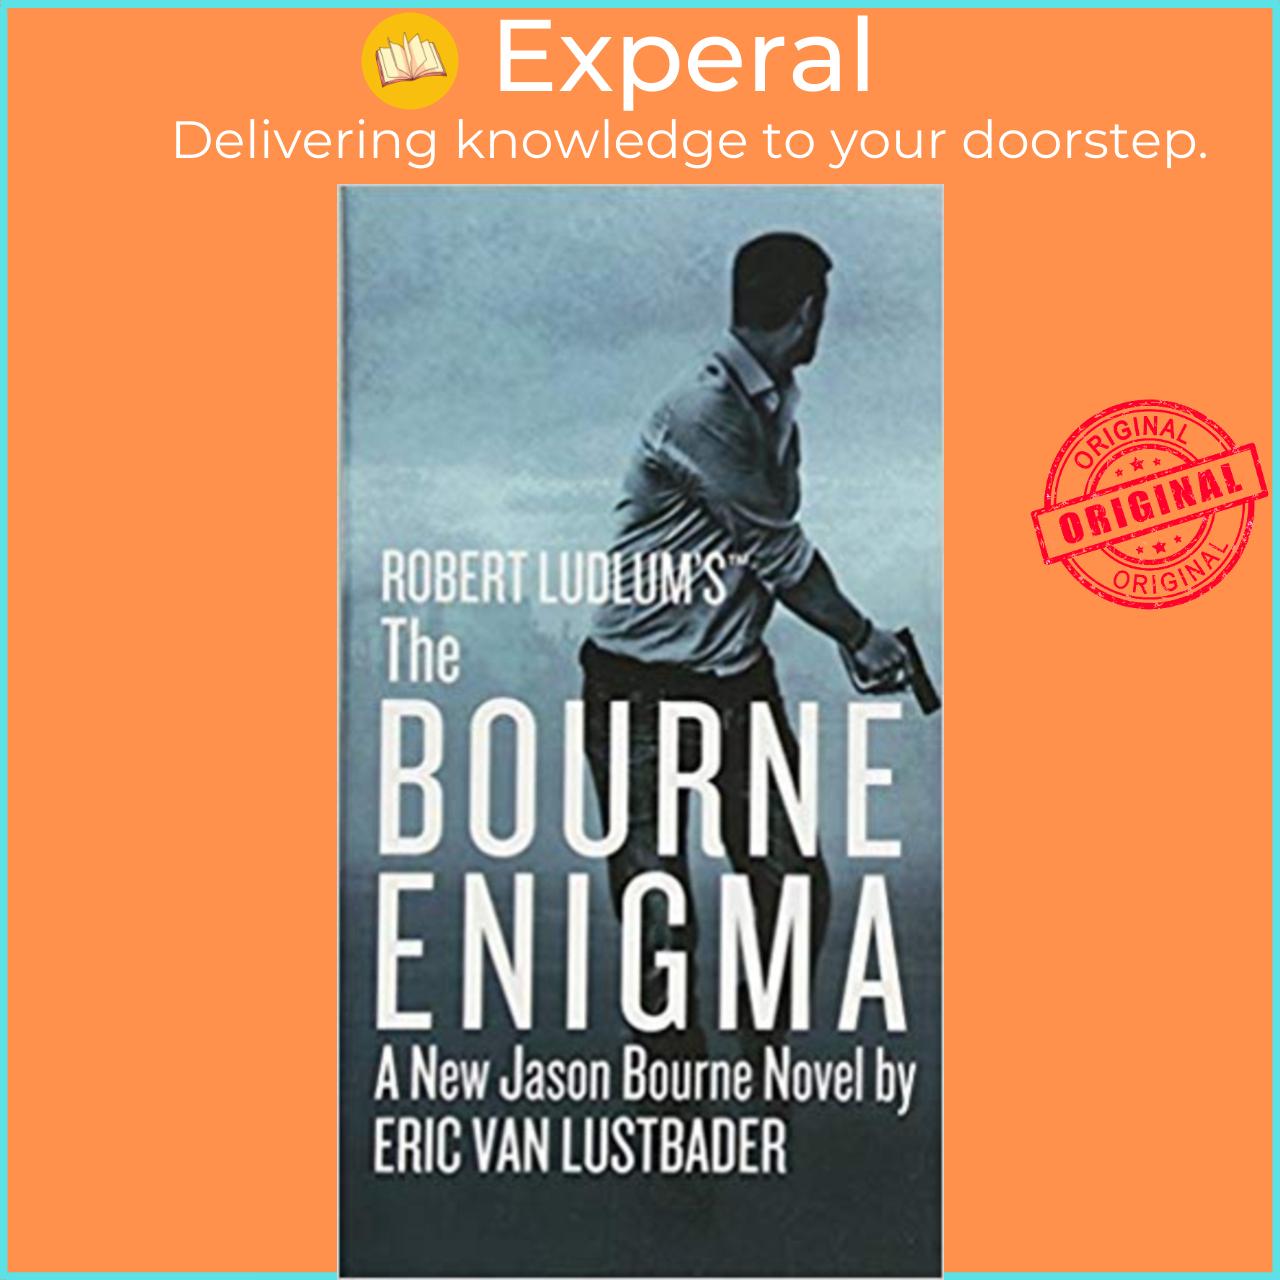 Sách - Robert Ludlum's (TM) the Bourne Enigma by Eric Van Lustbader (US edition, paperback)